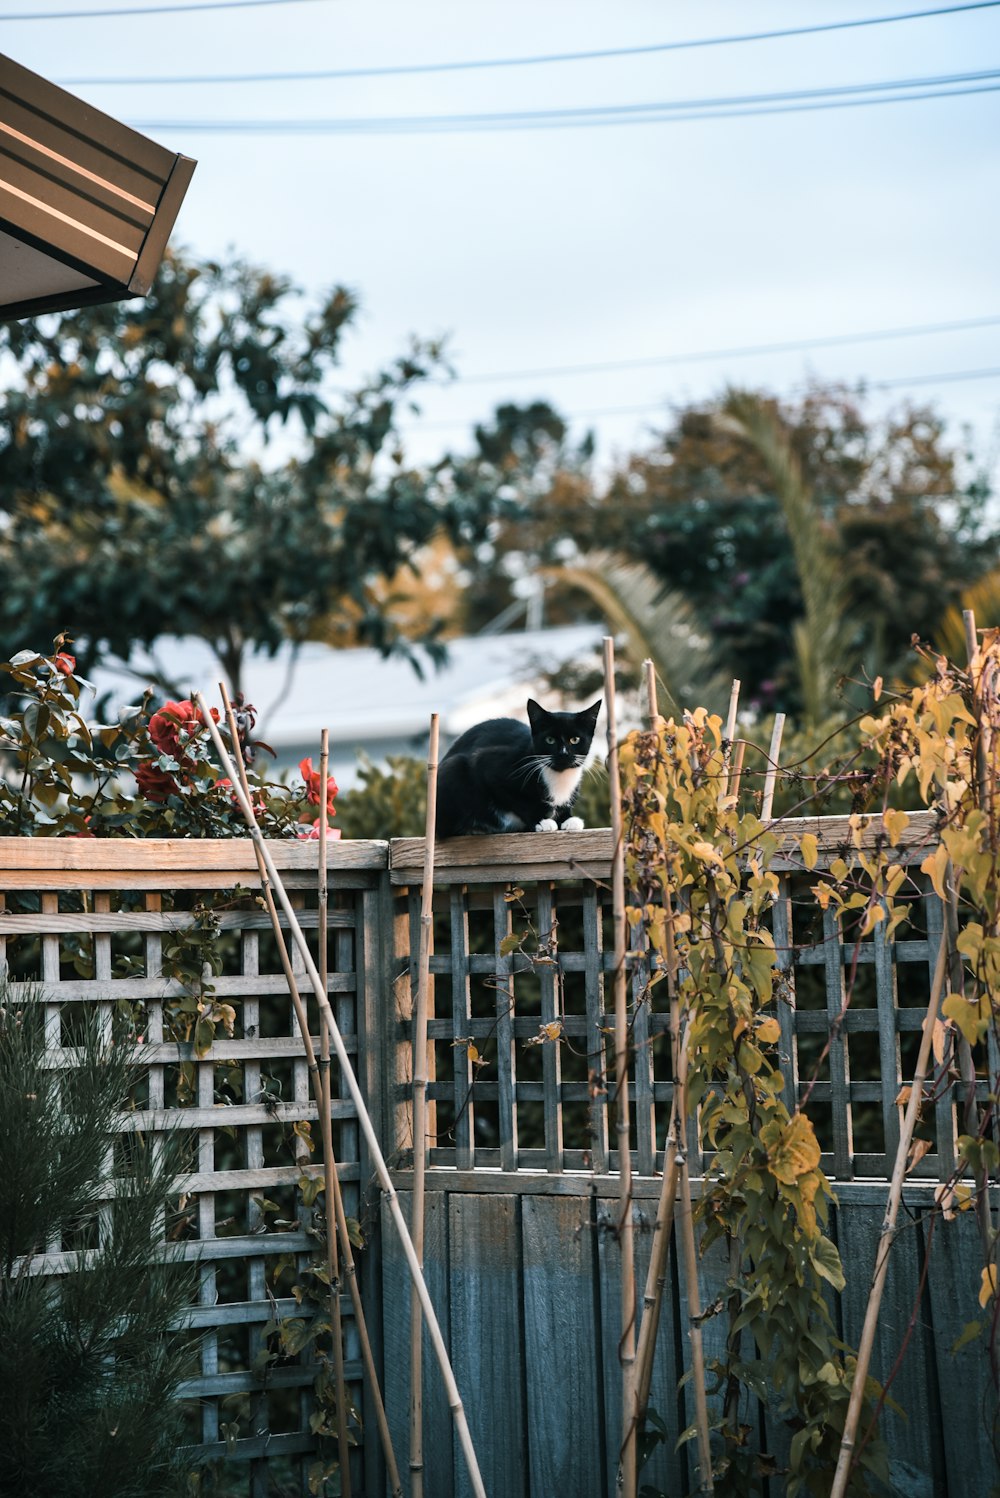 black and white cat on brown wooden fence during daytime